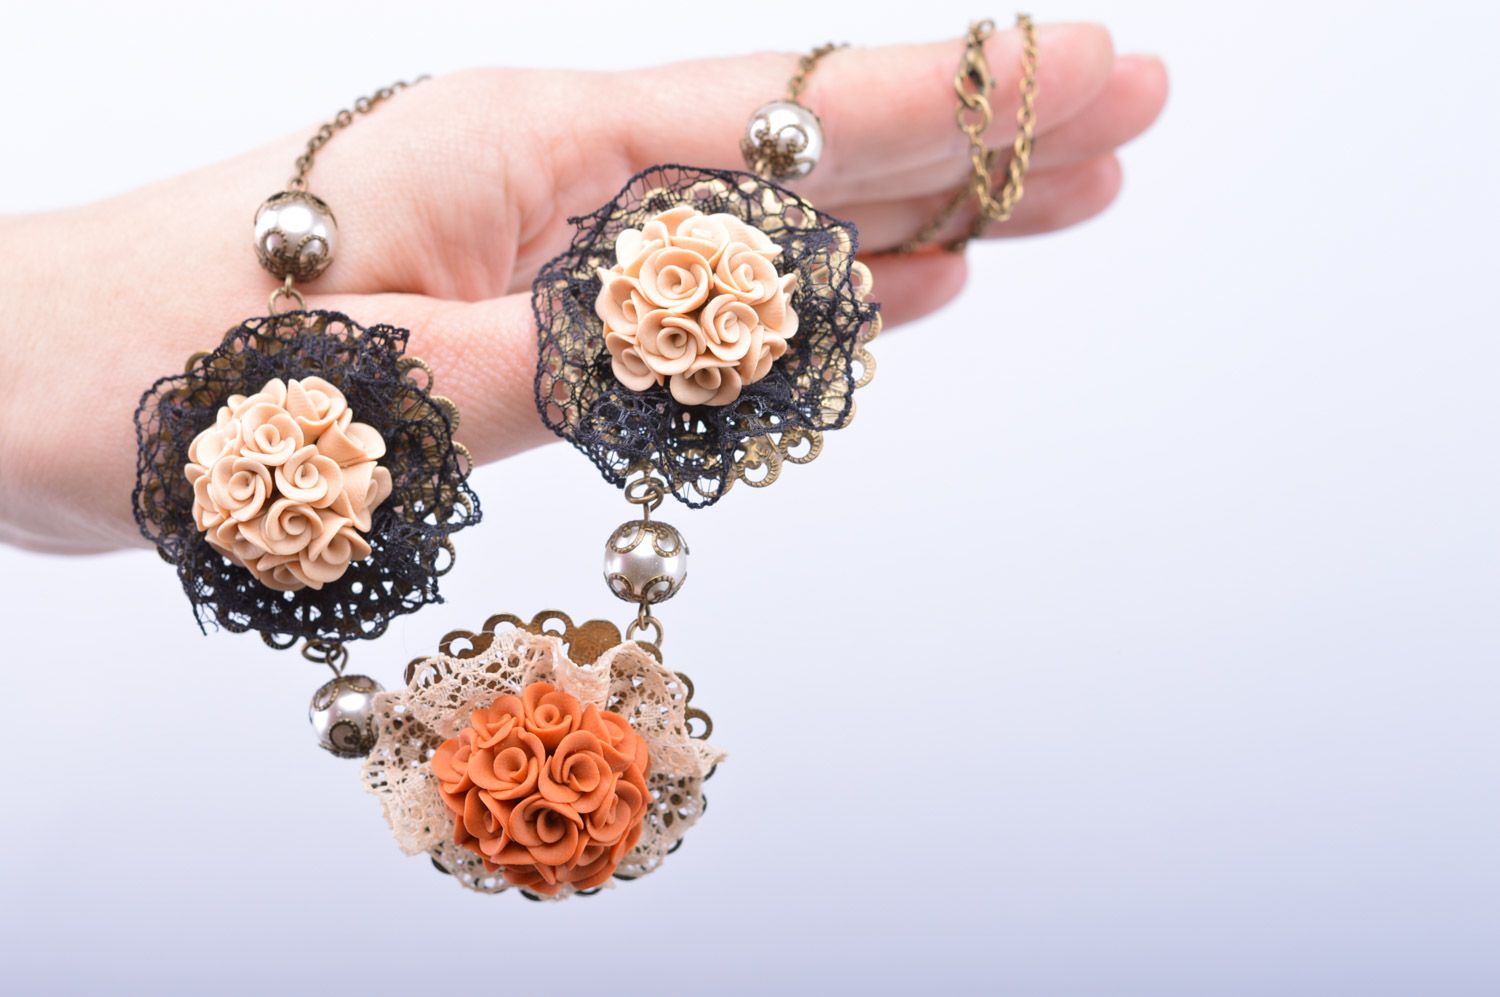 Handmade volume polymer clay flower necklace with lace and beads in antique style photo 5